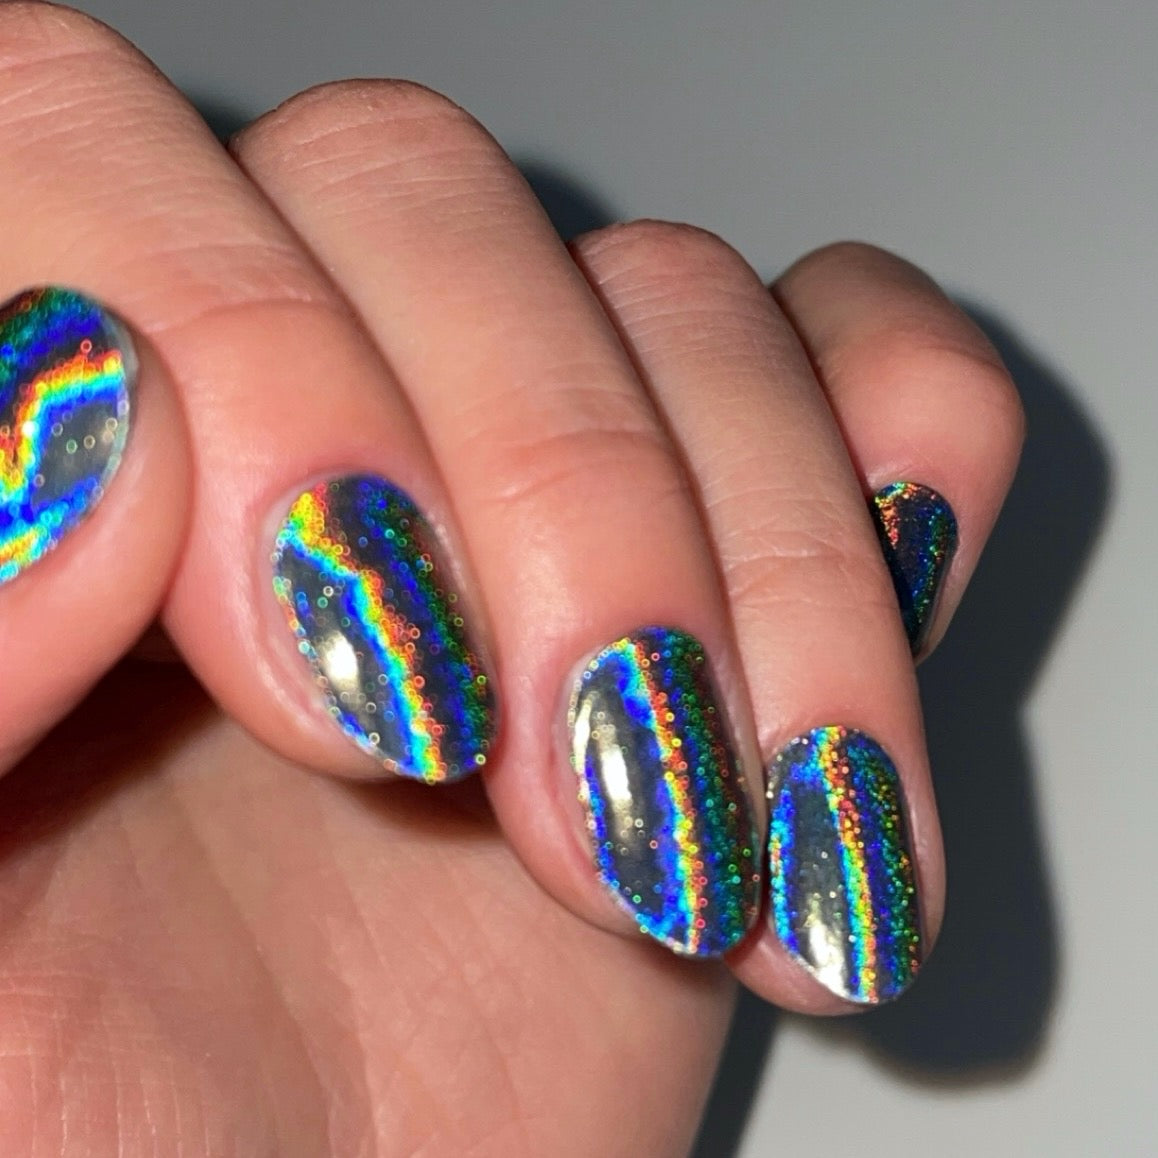 PREORDER (29/5 DISPATCH) Holo Holo (Silver) | Super Jellies DIY Semi Cured Gel Nail Wraps